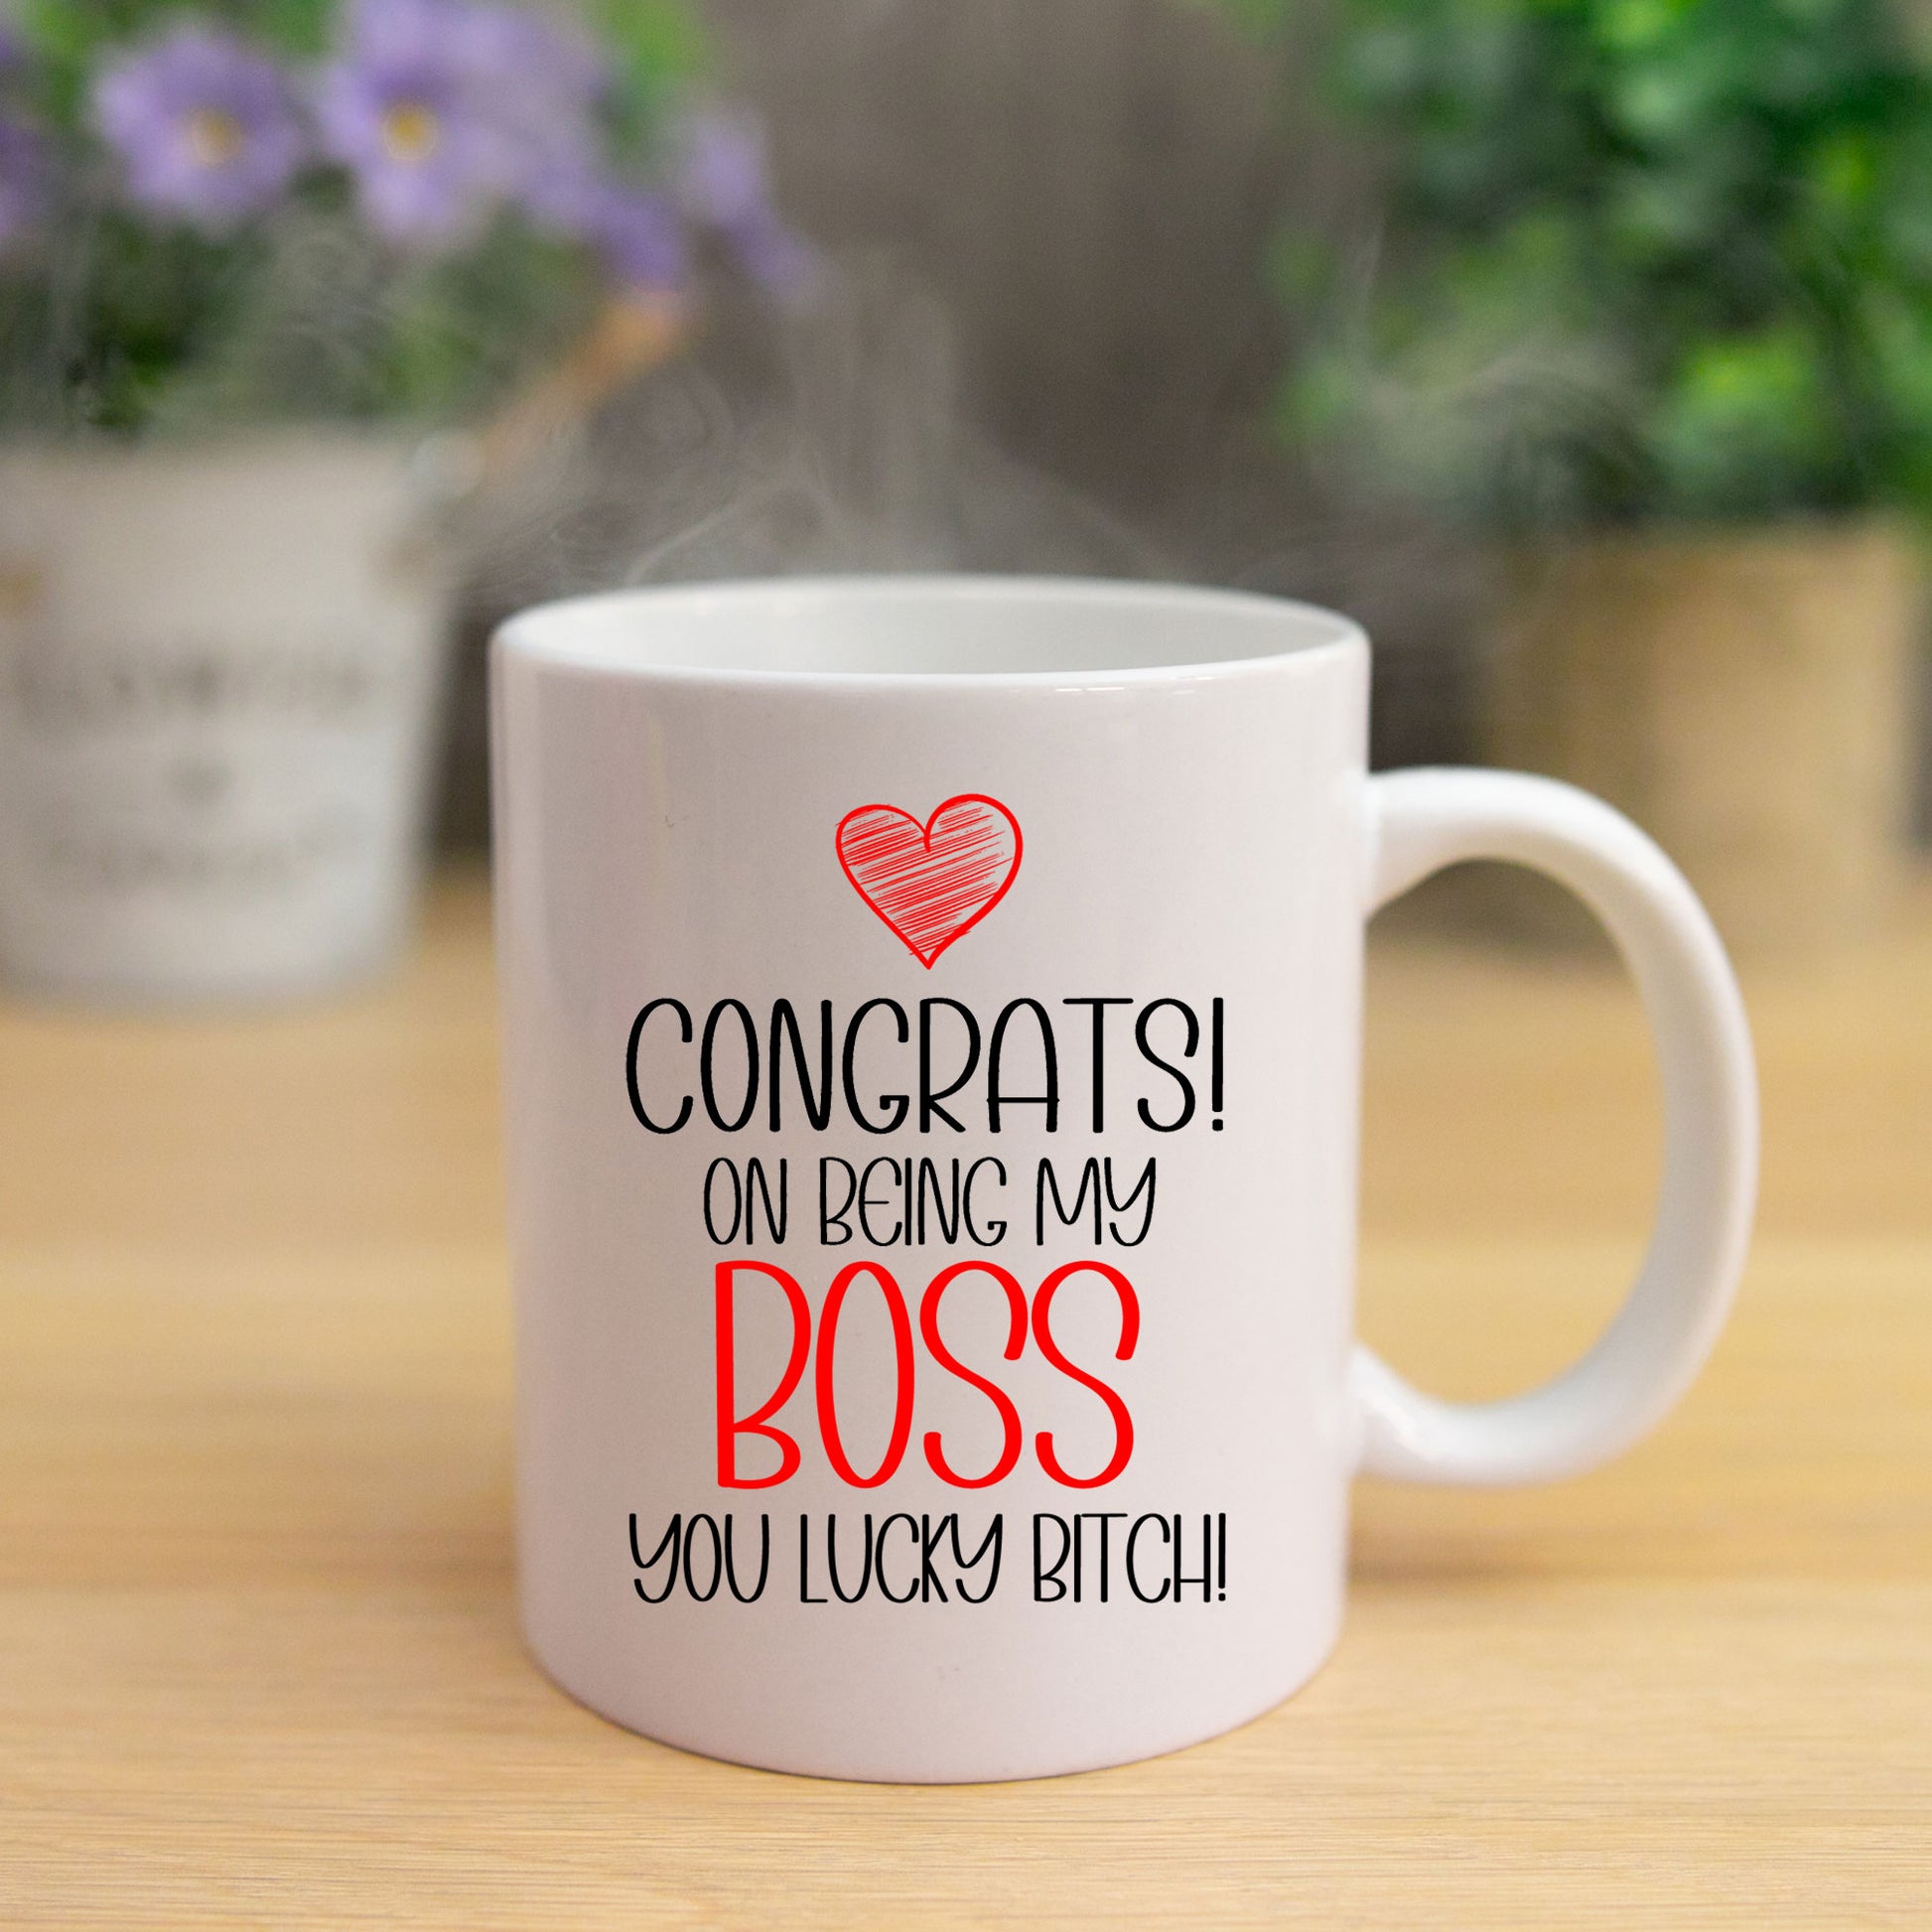 Congrats On Being My Boss Mug and/or Coaster Gift  - Always Looking Good - Lucky Bitch Mug On Its Own  